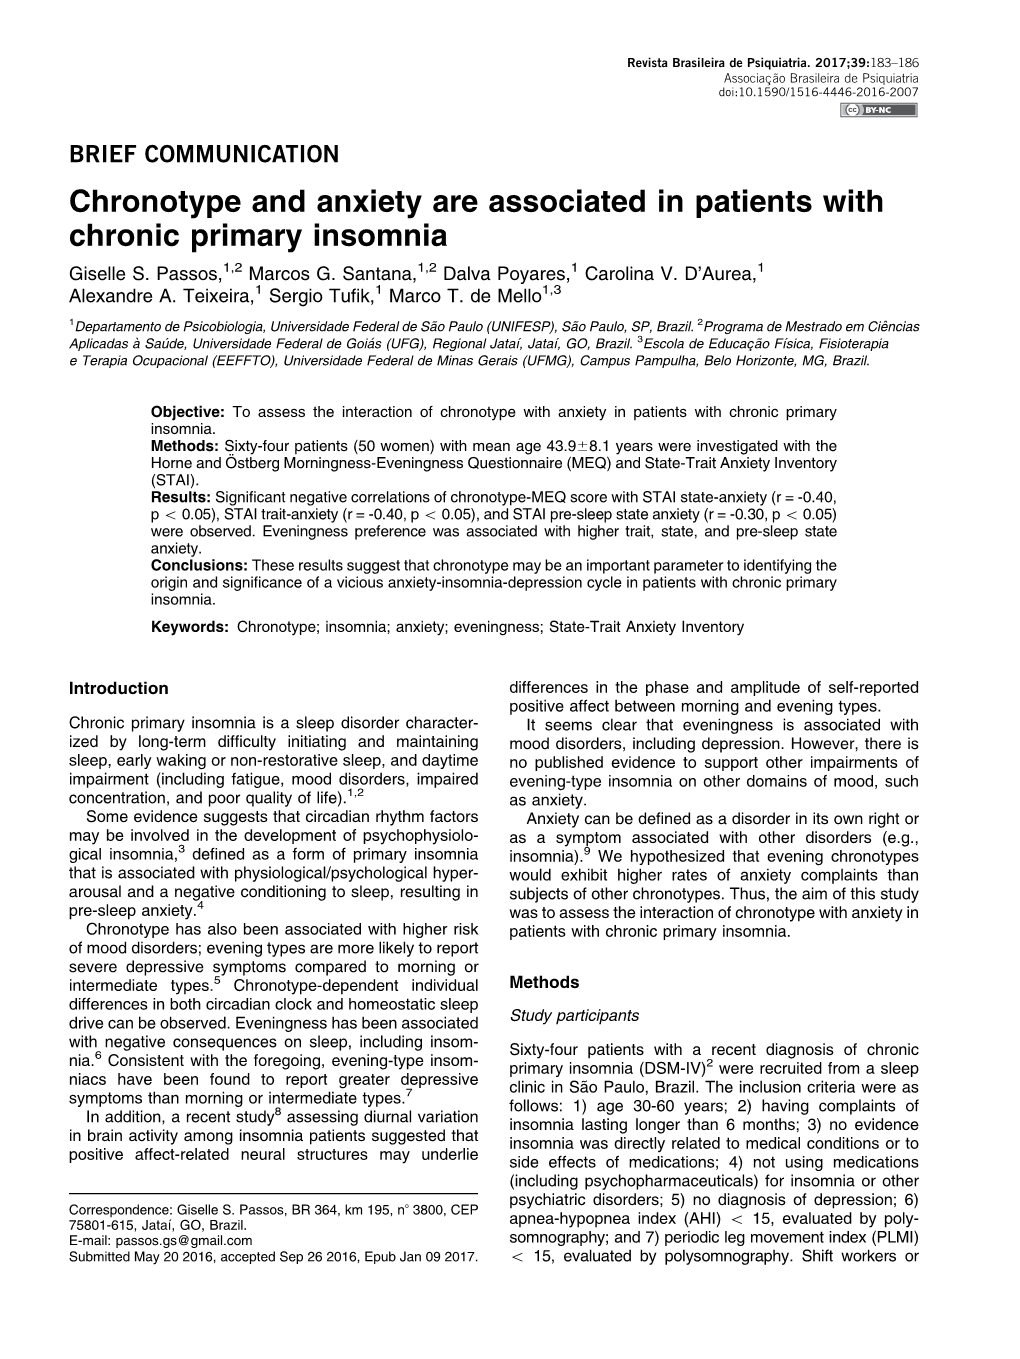 Chronotype and Anxiety Are Associated in Patients with Chronic Primary Insomnia Giselle S